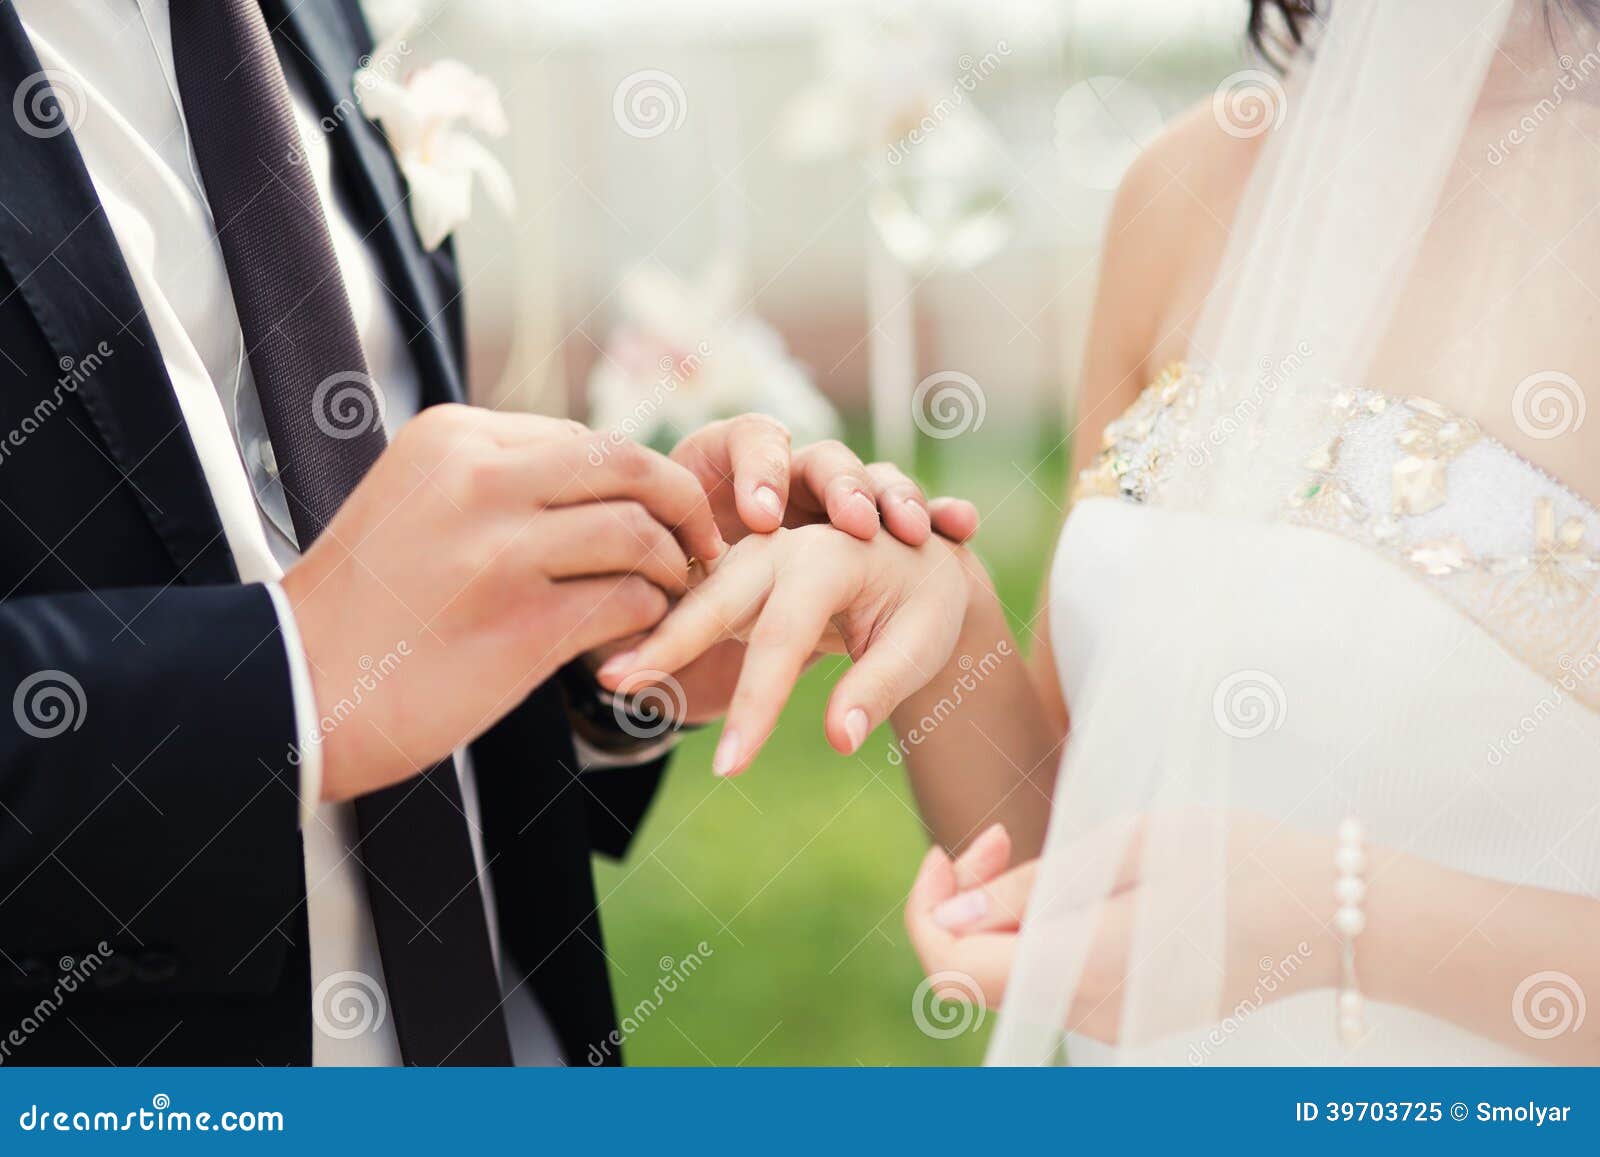 wedding couple hands close-up during wedding ceremony